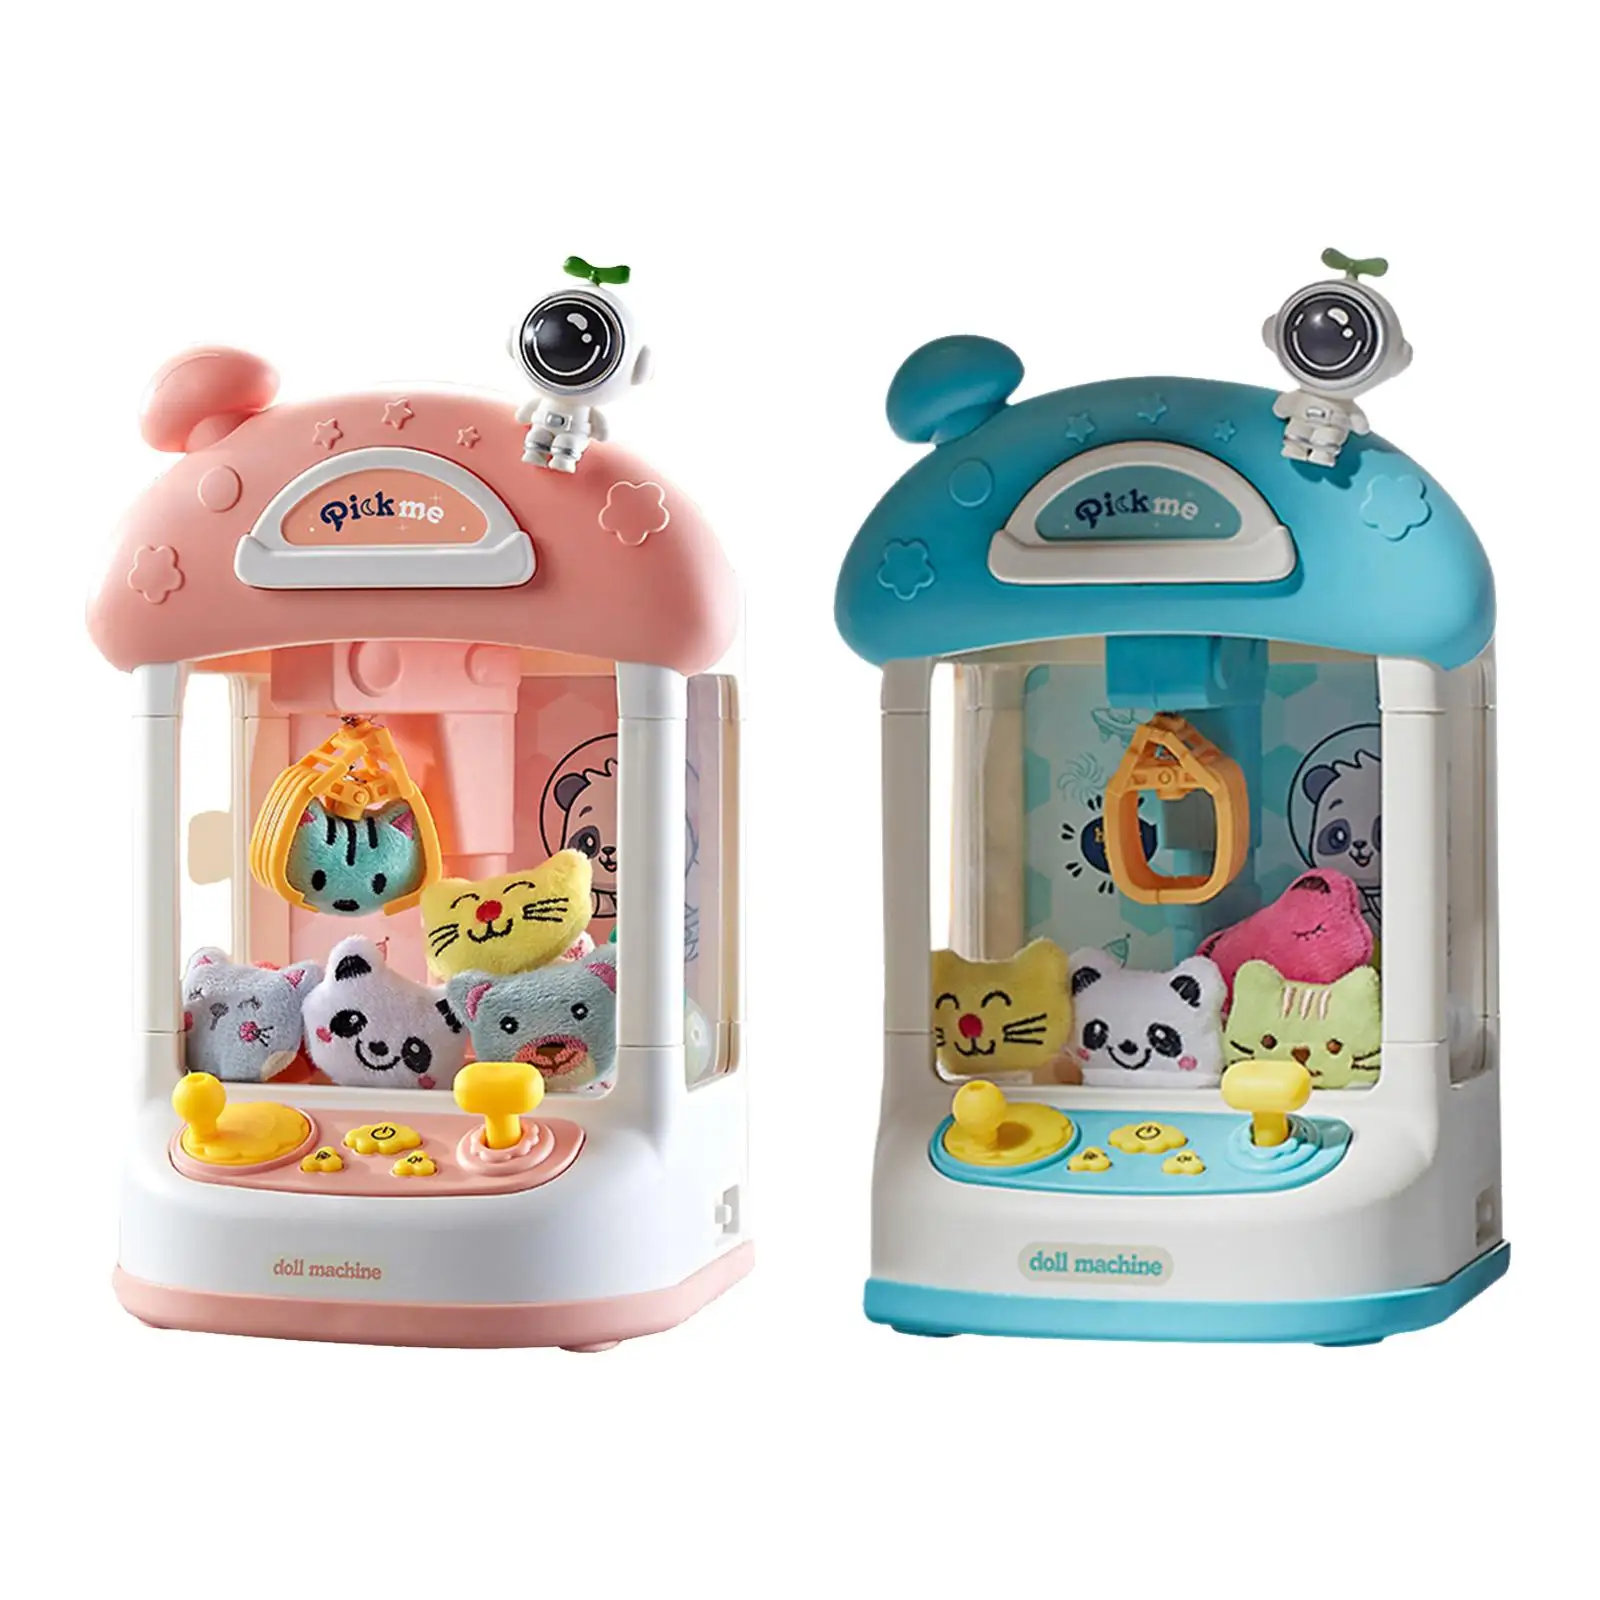 Kids Claw Machine Lovely Mini Claw Game Electronic Small Toys Mini Vending Machines for Adults Boys Children Girls Holiday Gifts